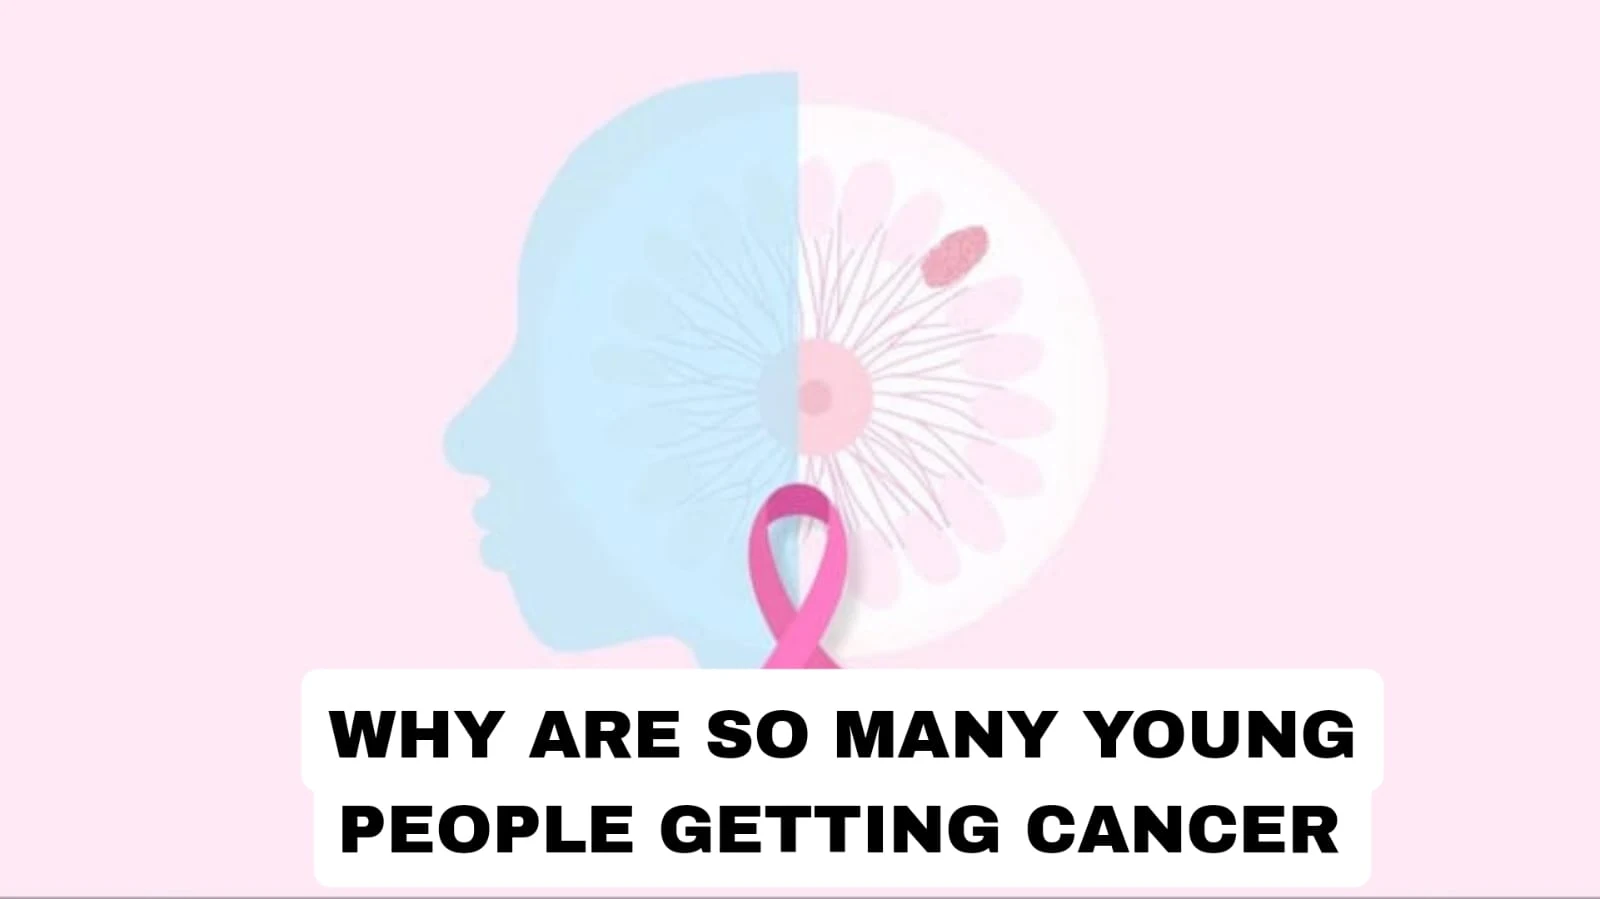 Why are so many young people getting cancer